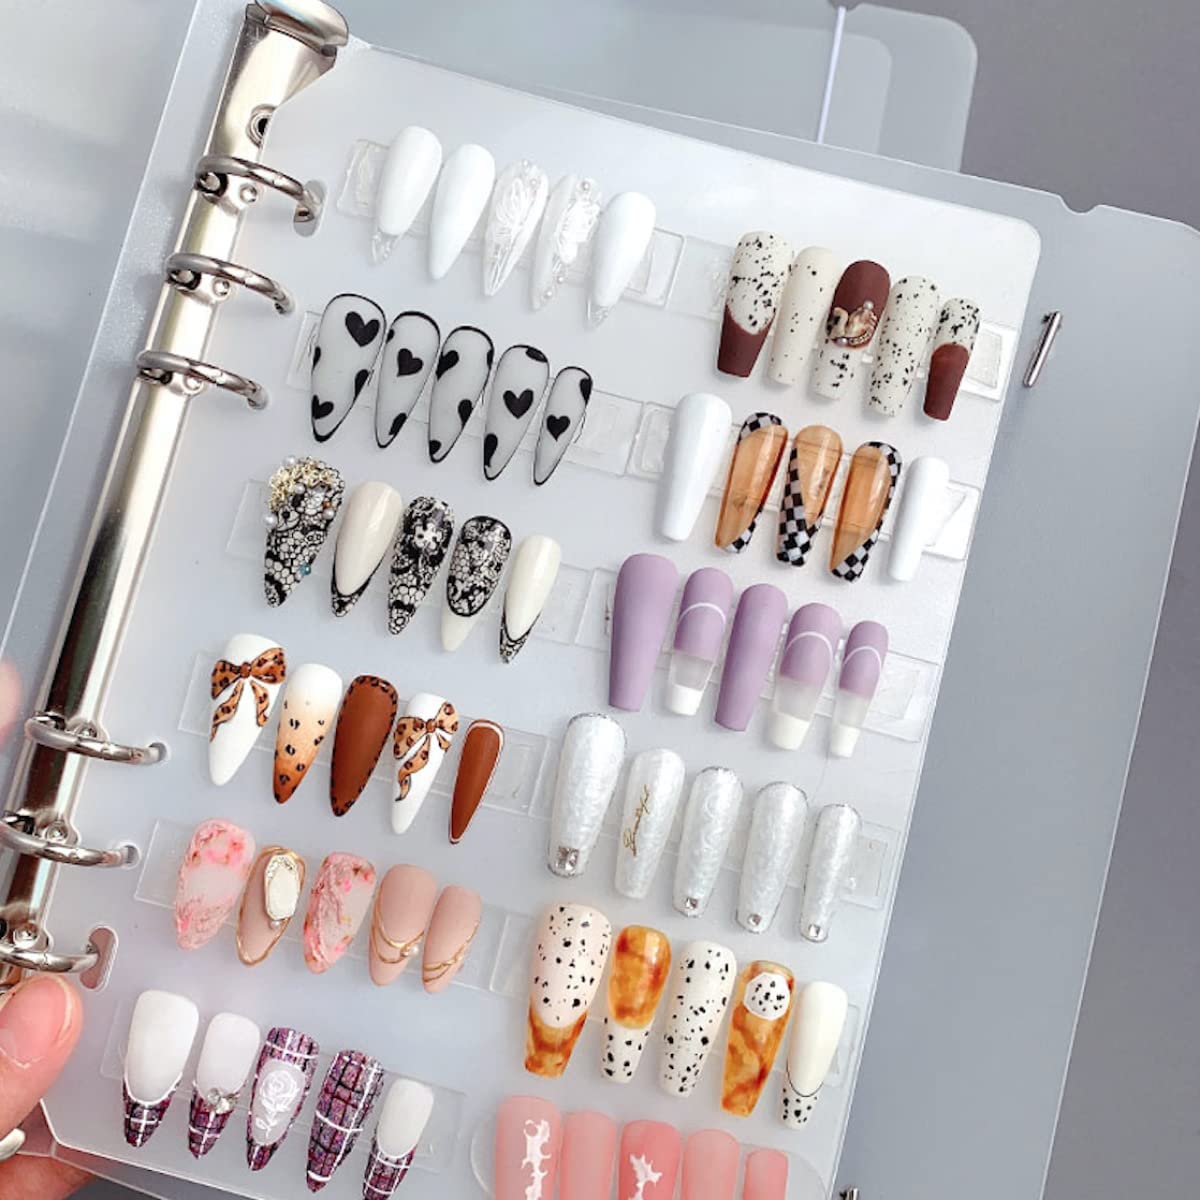 Nail Art Display Tools Storage Book (4 Inside Pages)